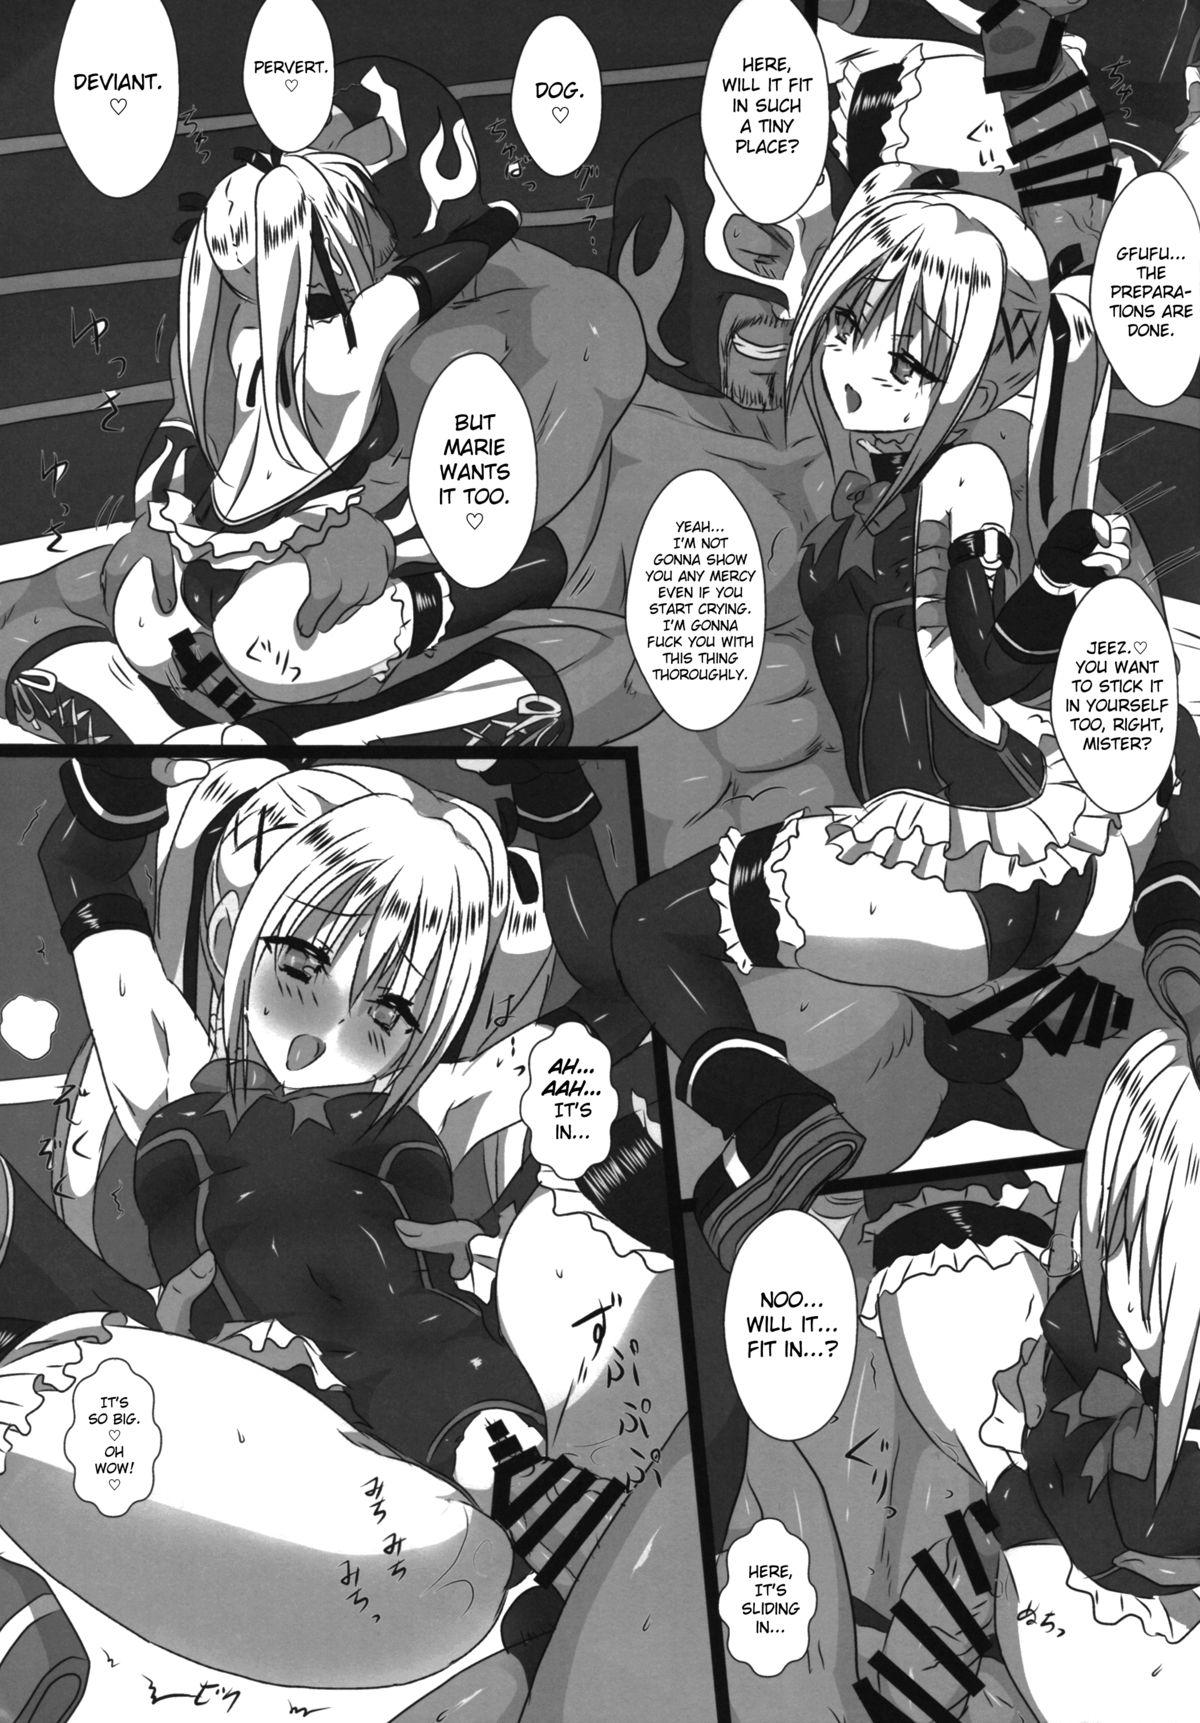 Egypt Koko de Shitai no ne...? | This is where you want to do it, right...? - Dead or alive European - Page 10